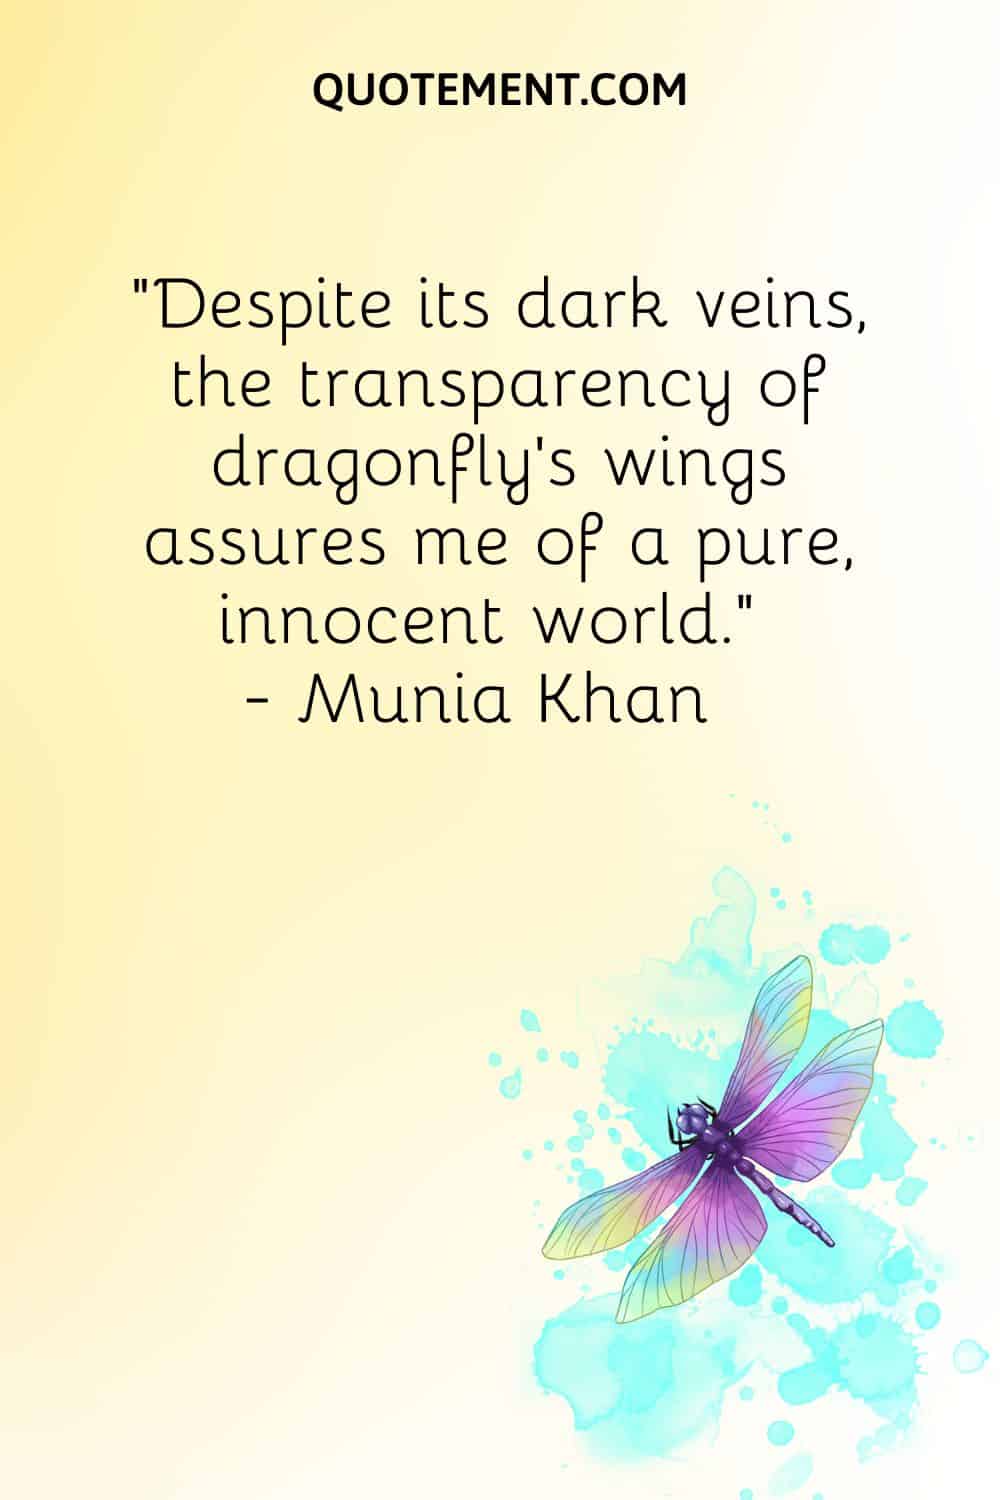 illustration of a violet dragonfly representing dragonfly quote
